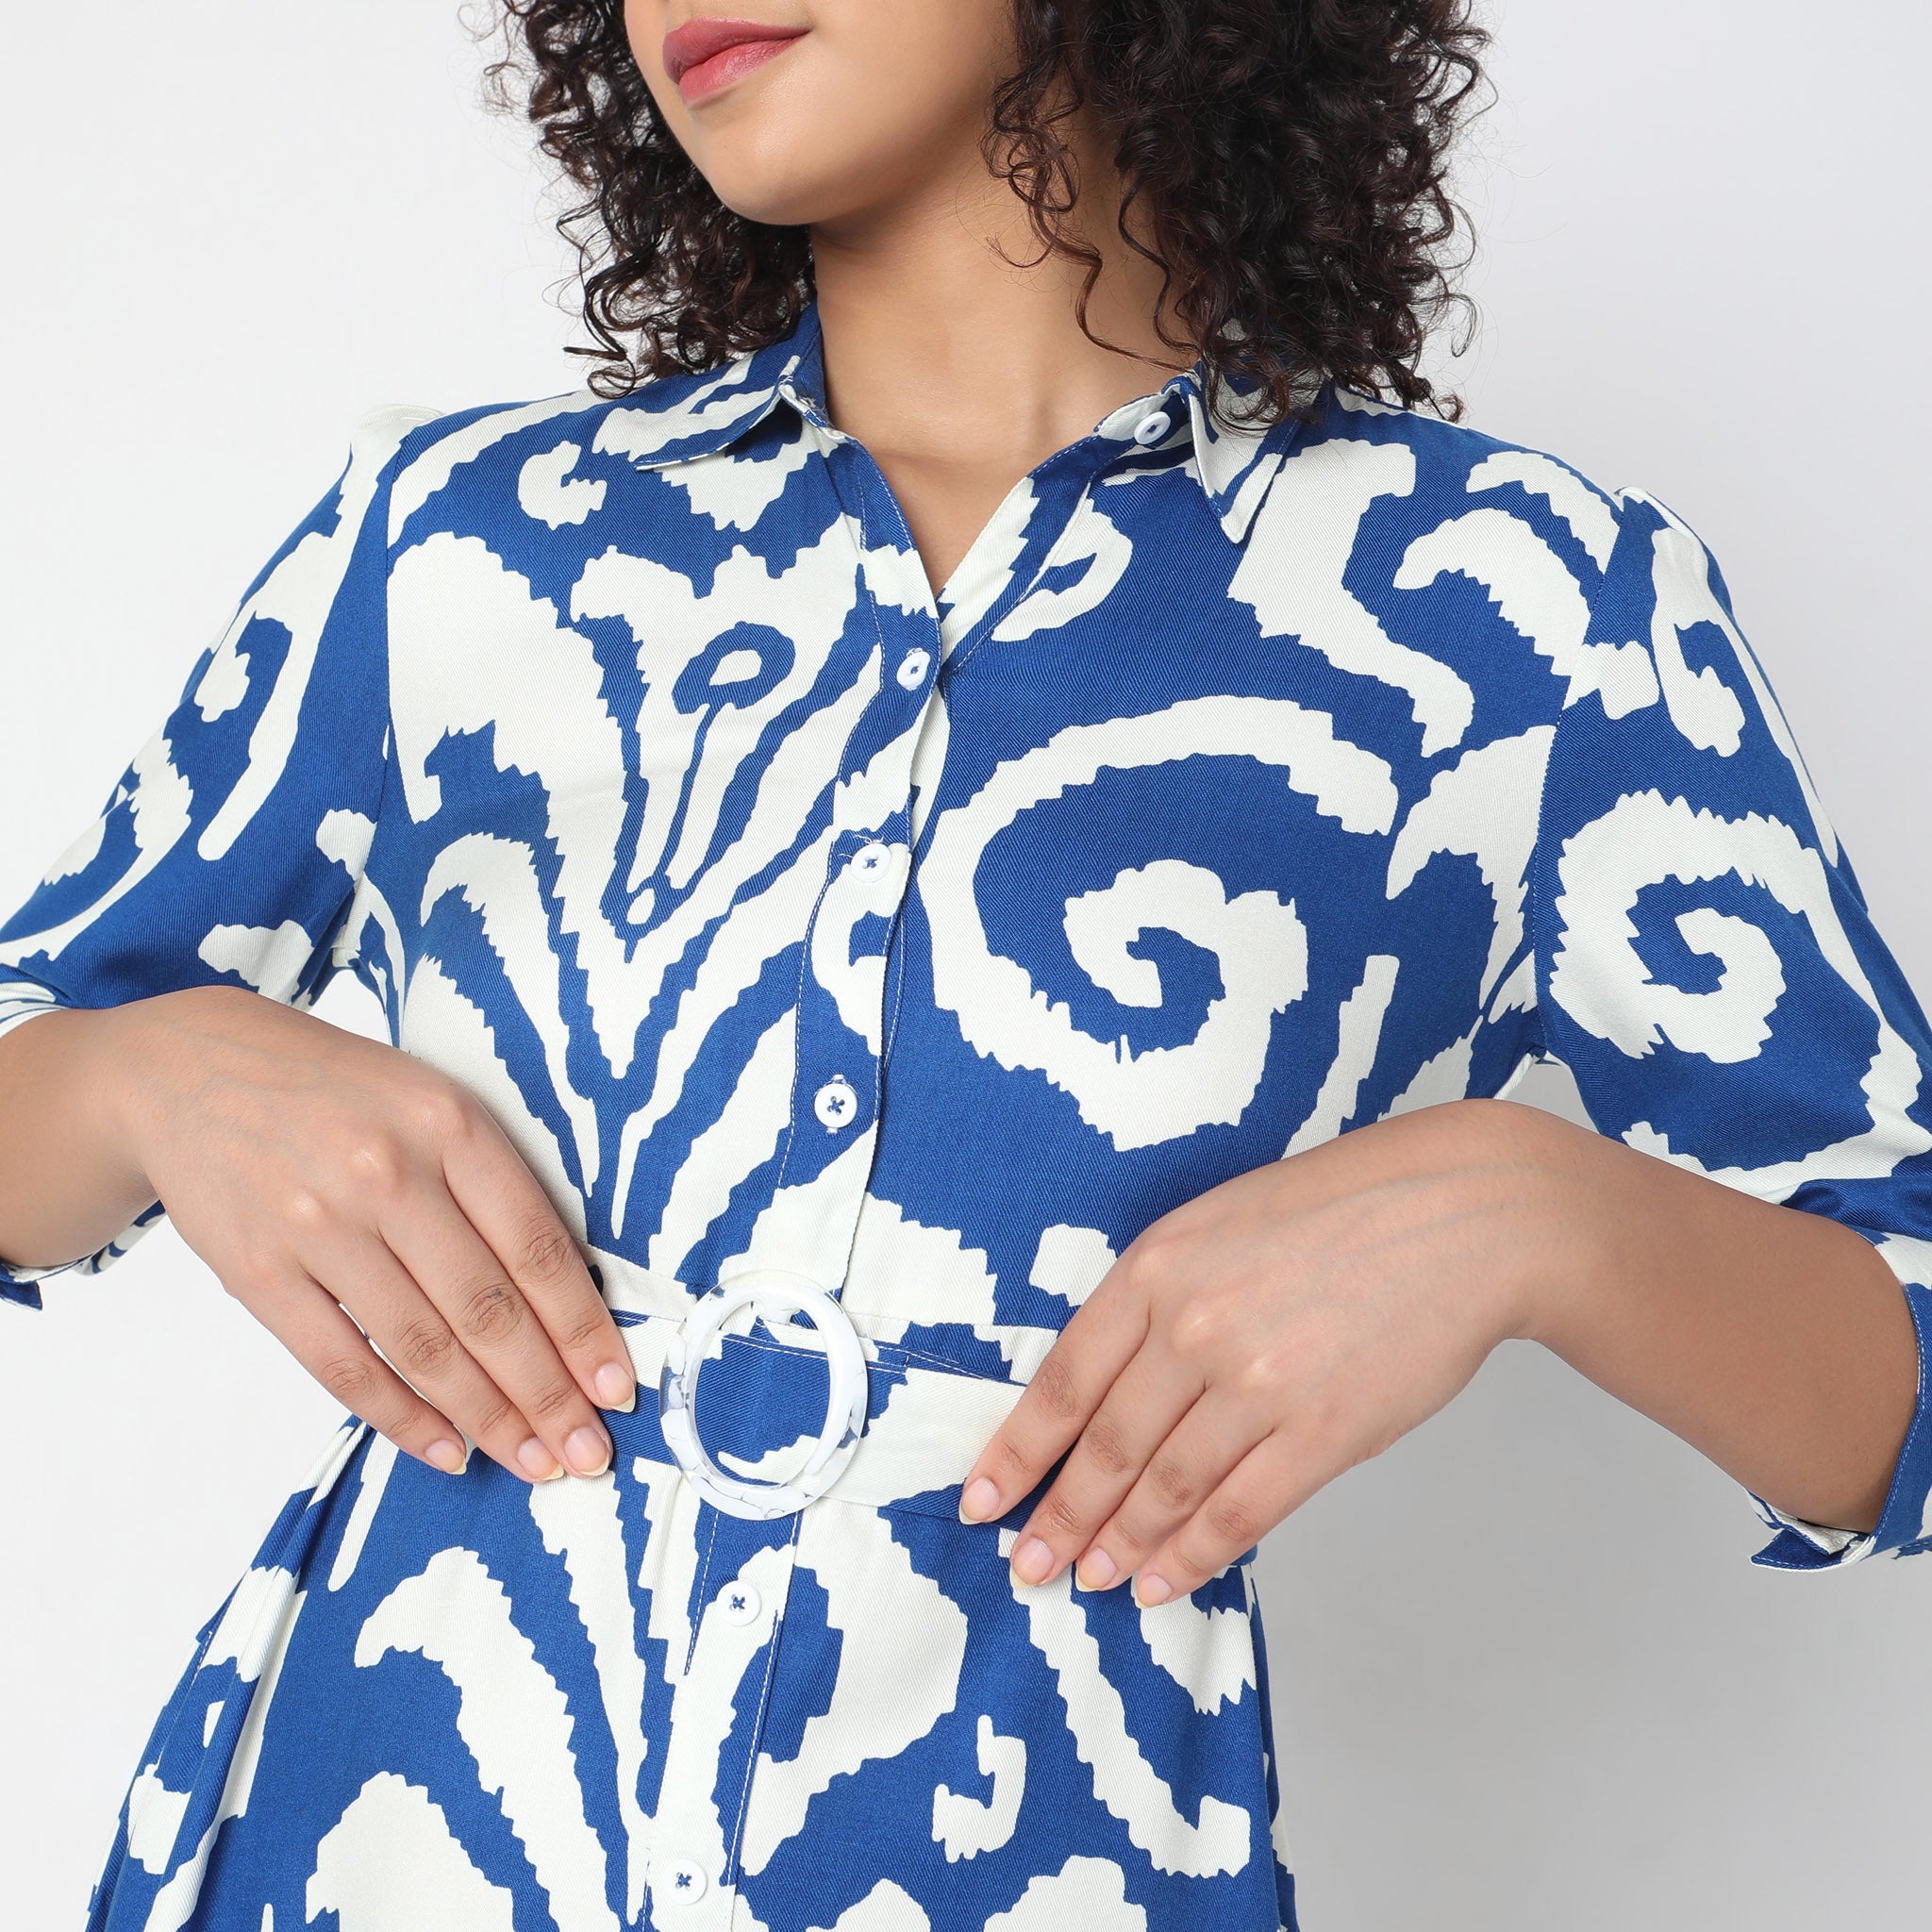 Flare Fit Abstract Dress